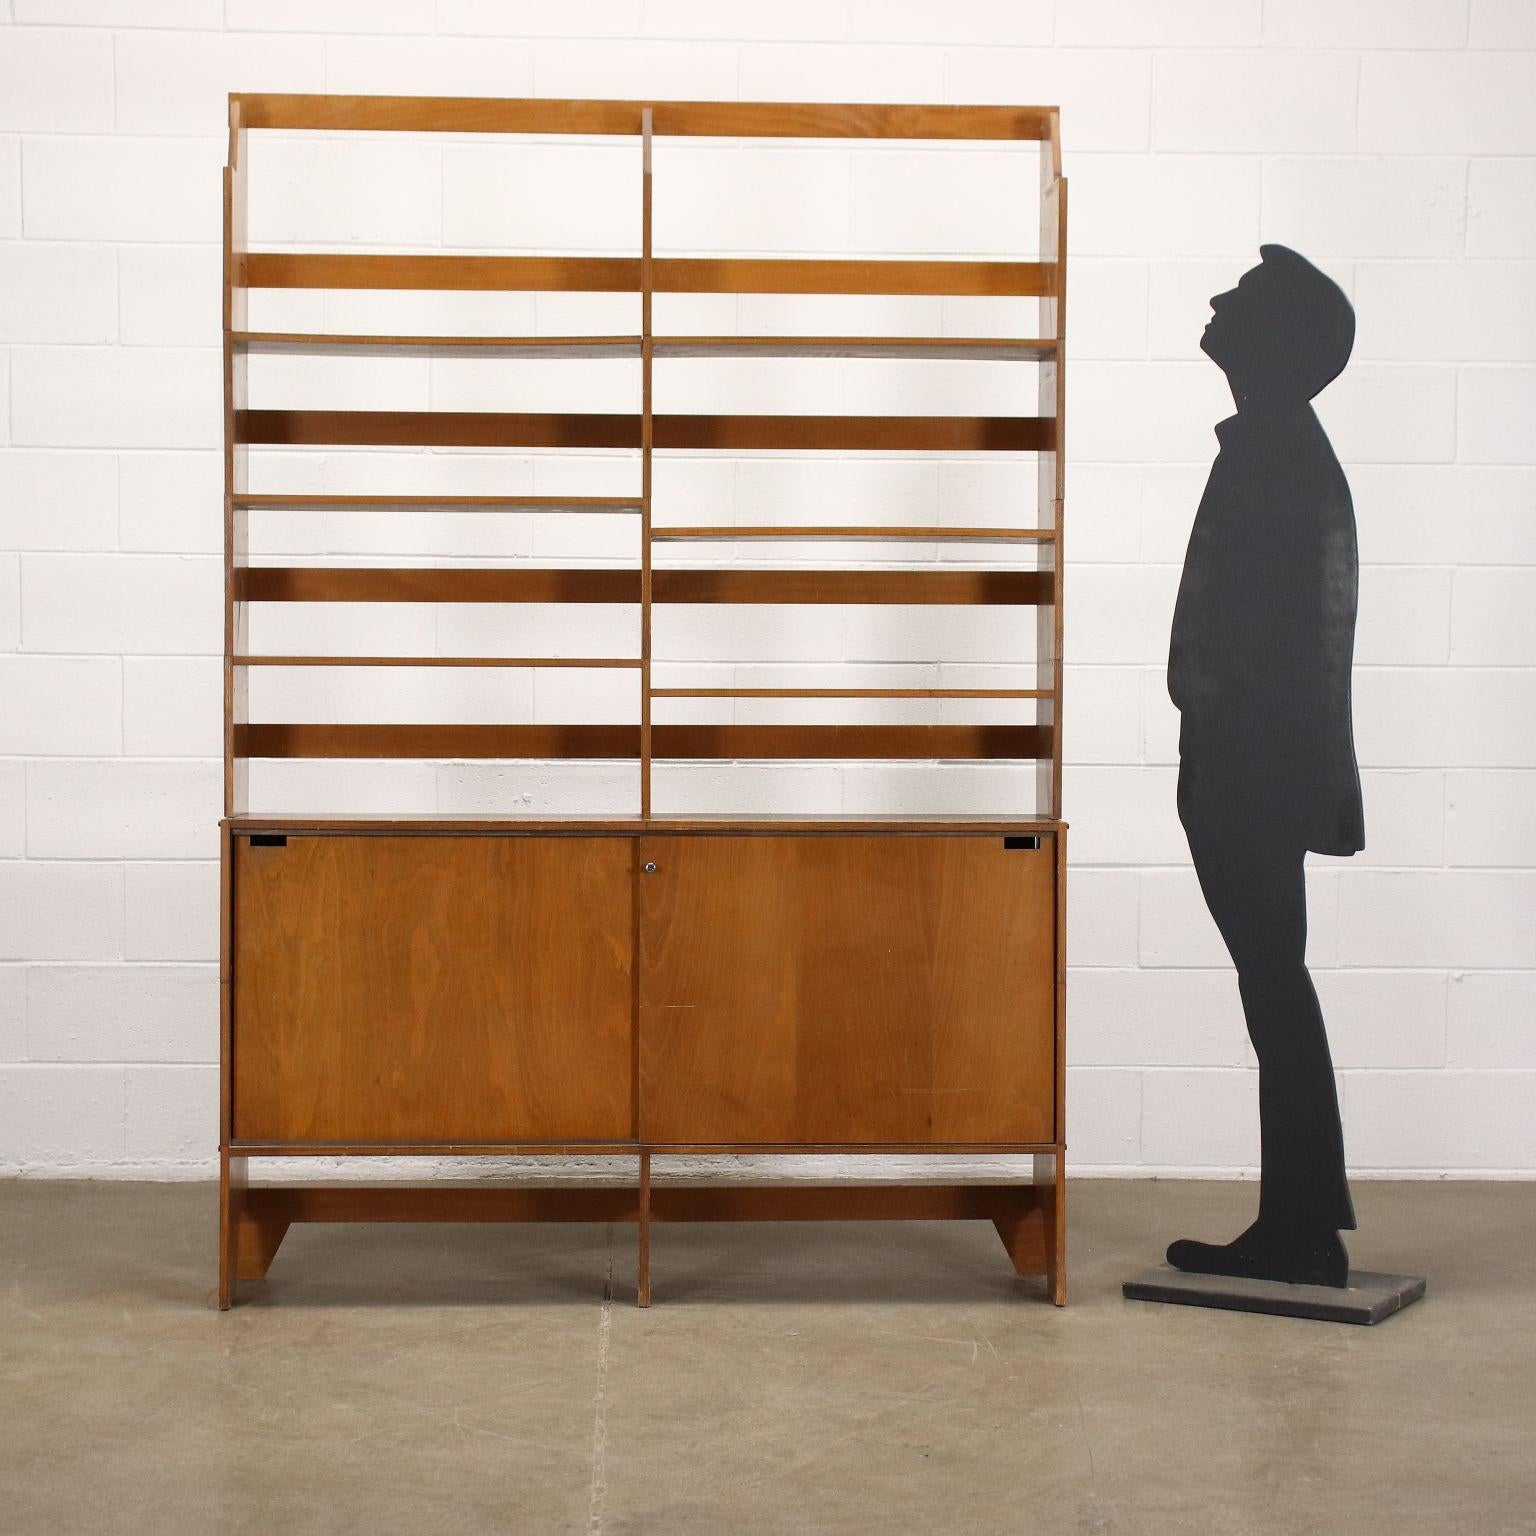 Two-bay bookcase designed in 1954. With modular and stackable elements in stained plywood, it has two storage compartments with sliding doors.